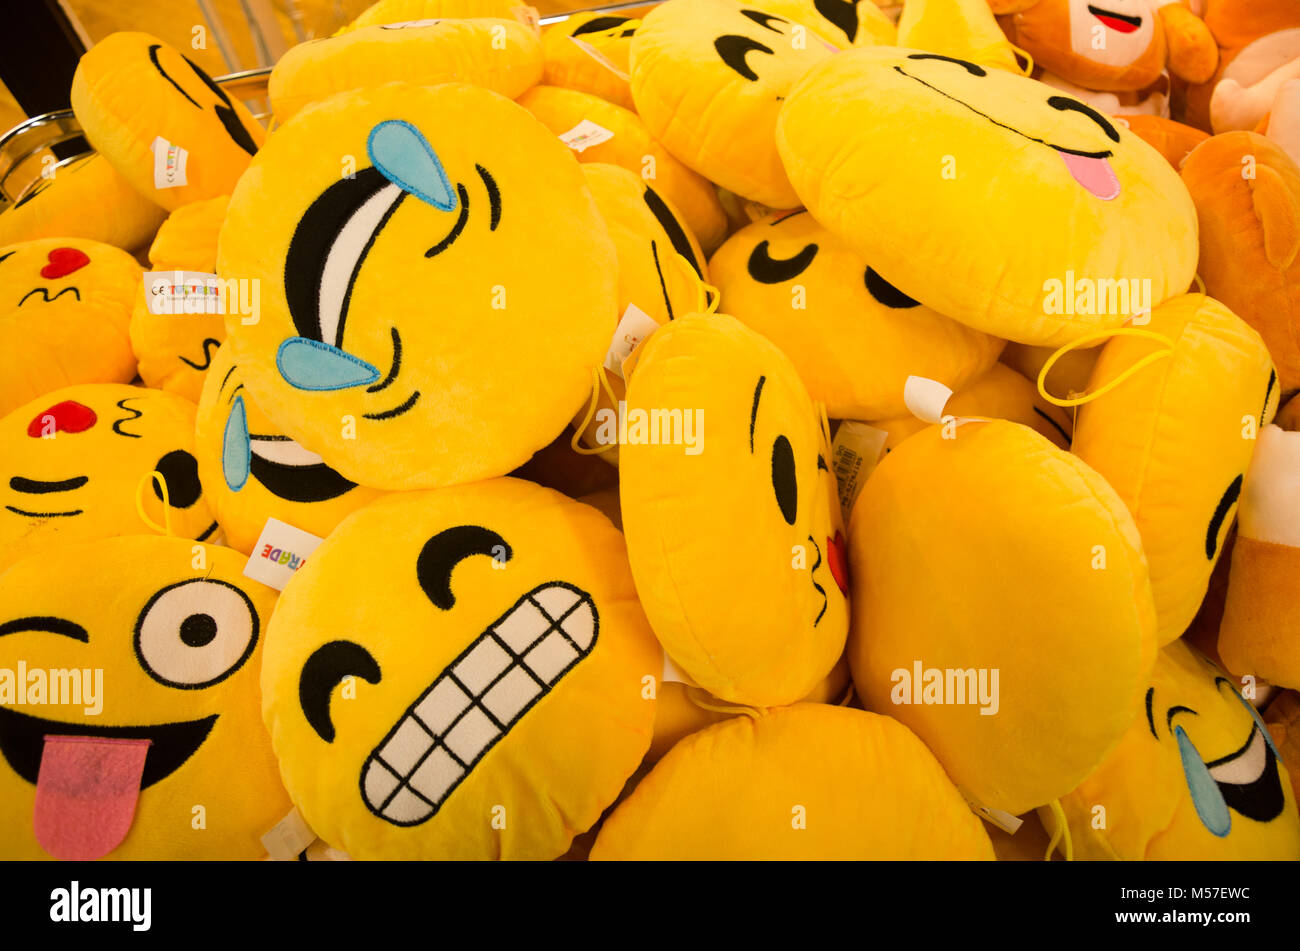 Full frame of variety of WhatsApp emoticon sofa cushion pillows kept for sale. Stock Photo